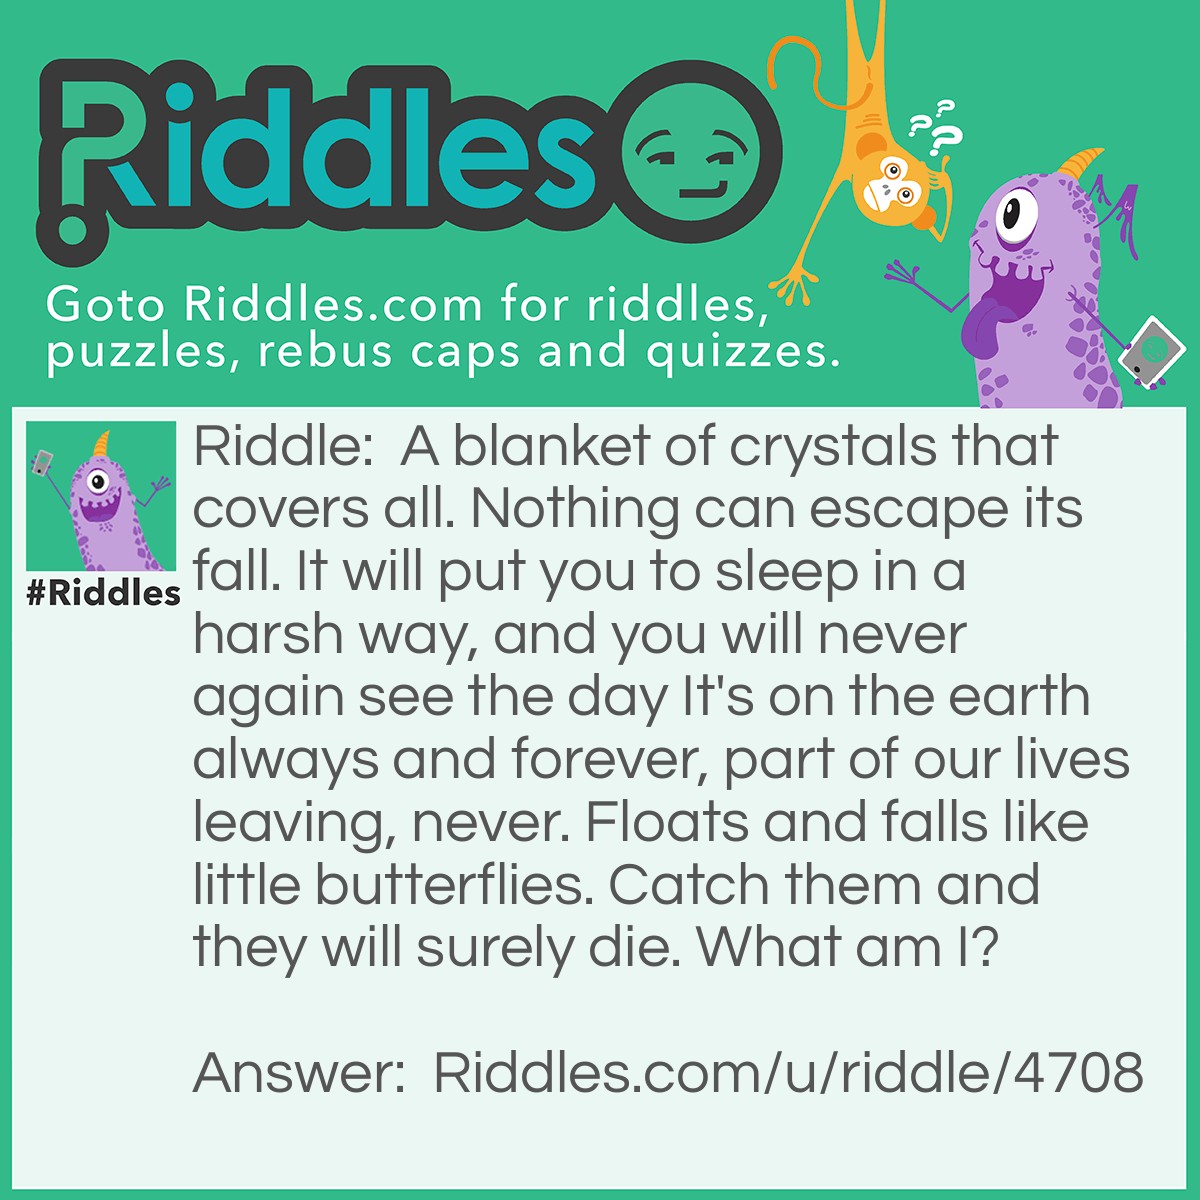 Riddle: A blanket of crystals that covers all. Nothing can escape its fall. It will put you to sleep in a harsh way, and you will never again see the day It's on the earth always and forever, part of our lives leaving, never. Floats and falls like little butterflies. Catch them and they will surely die. What am I? Answer: Snow.